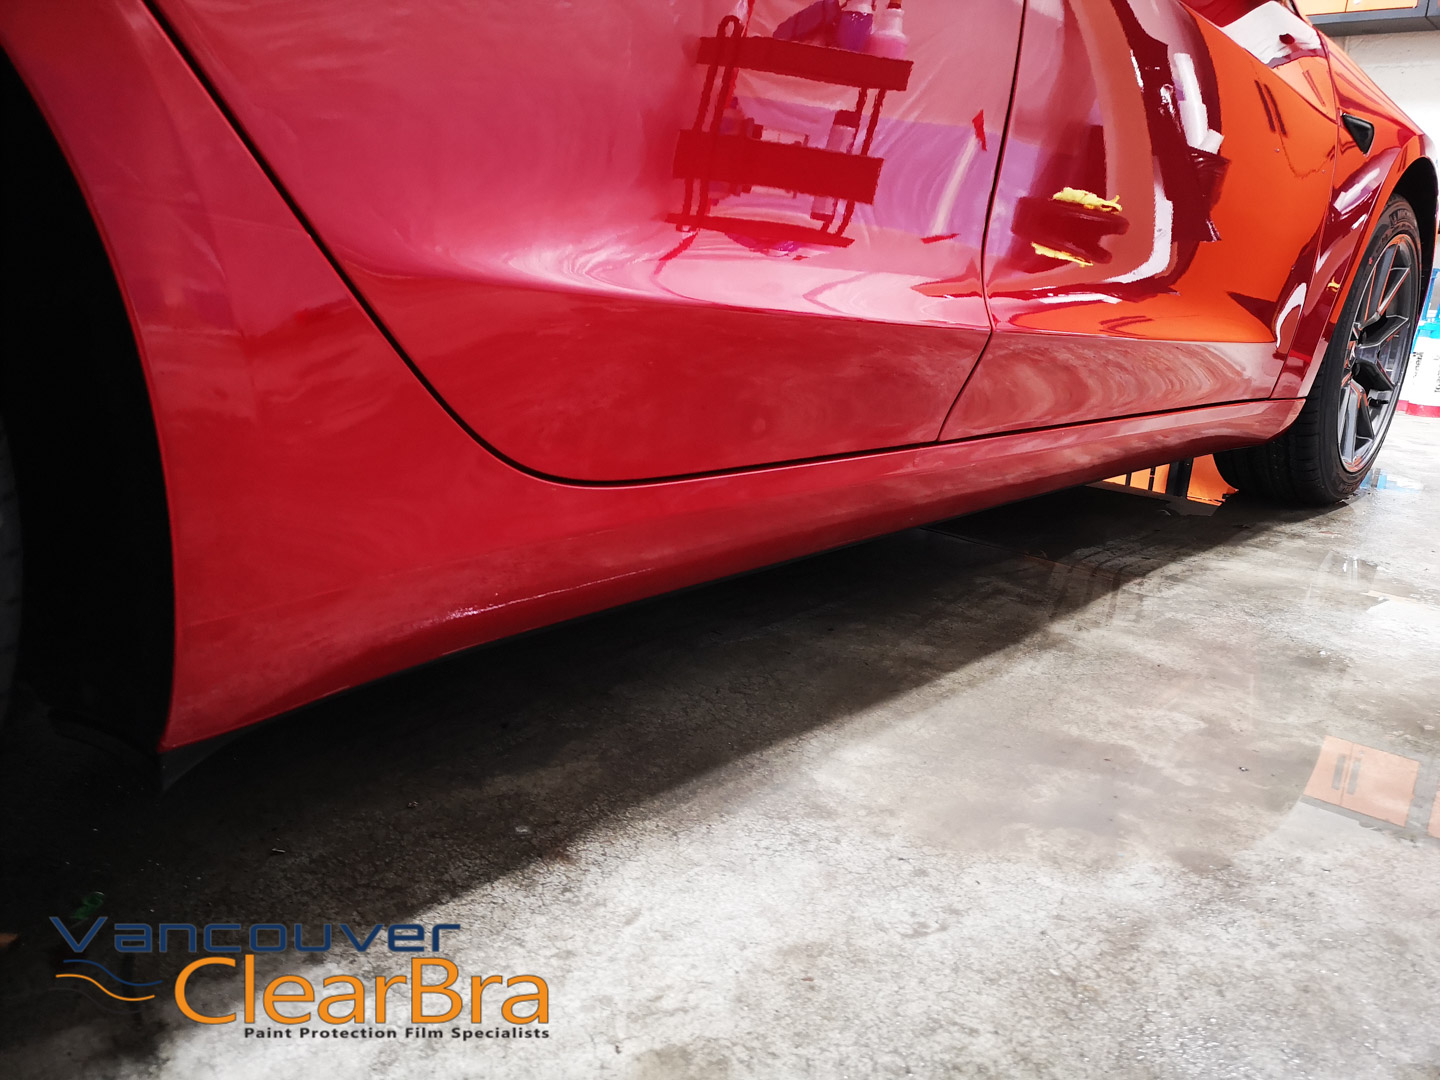 Should you protect your car's paint with ceramic coating?